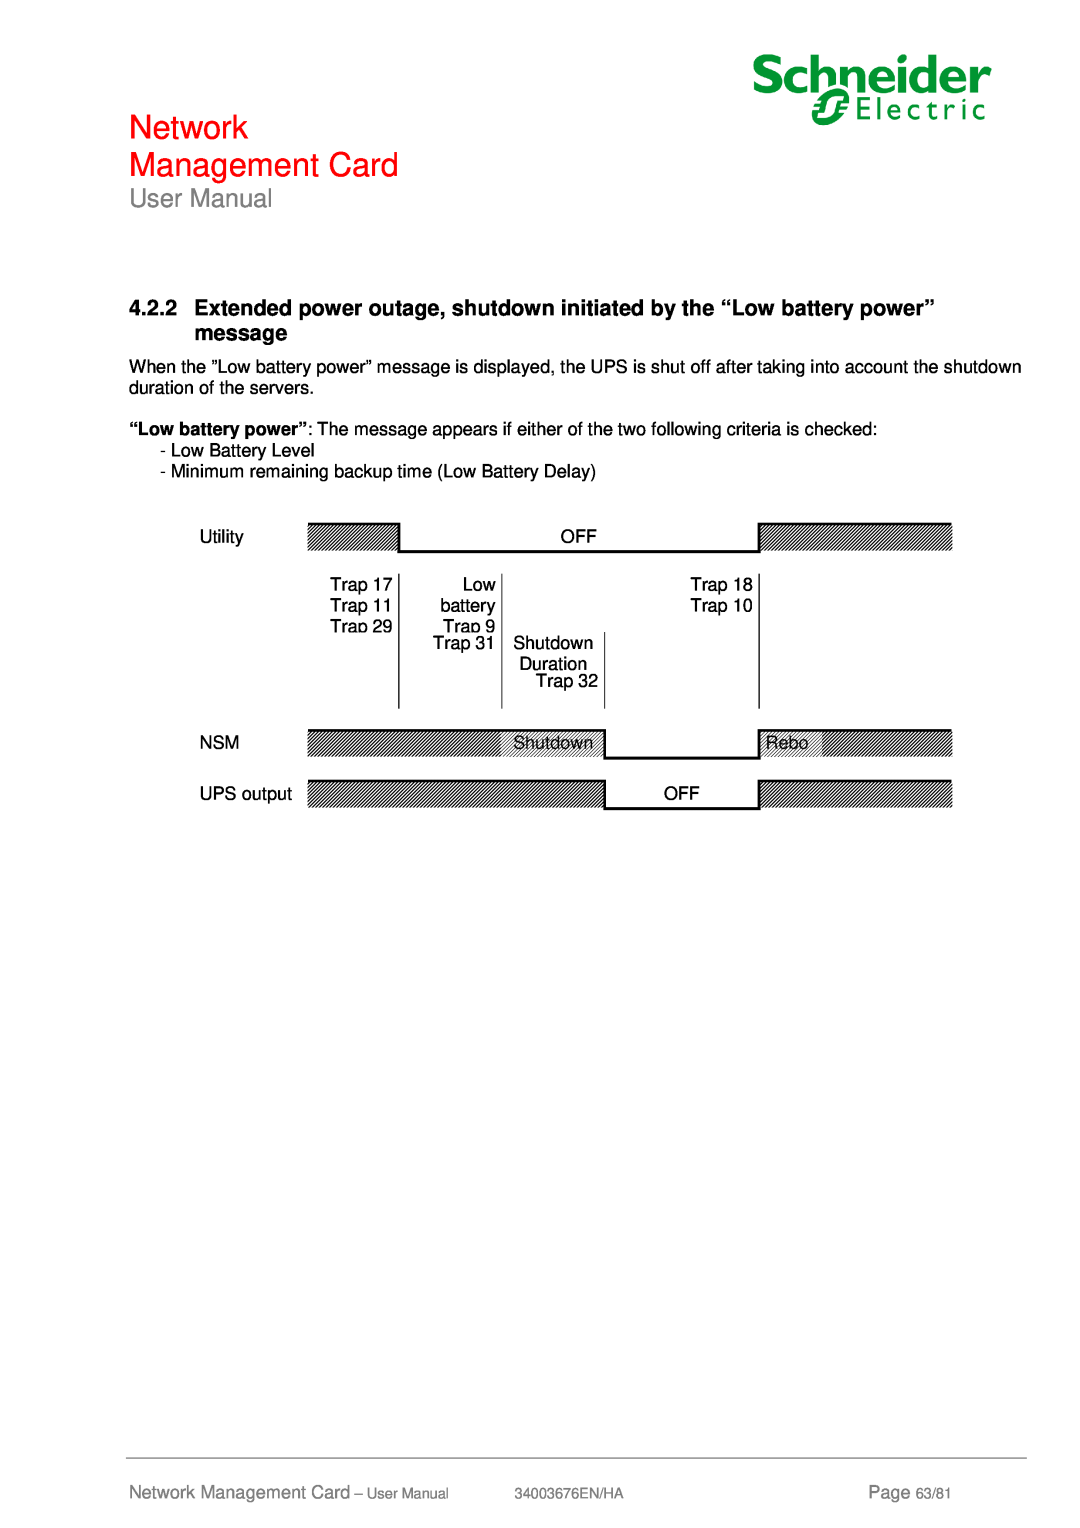 Schneider Electric 66074, 66846 user manual Network Management Card - User Manual, Page 63/81 